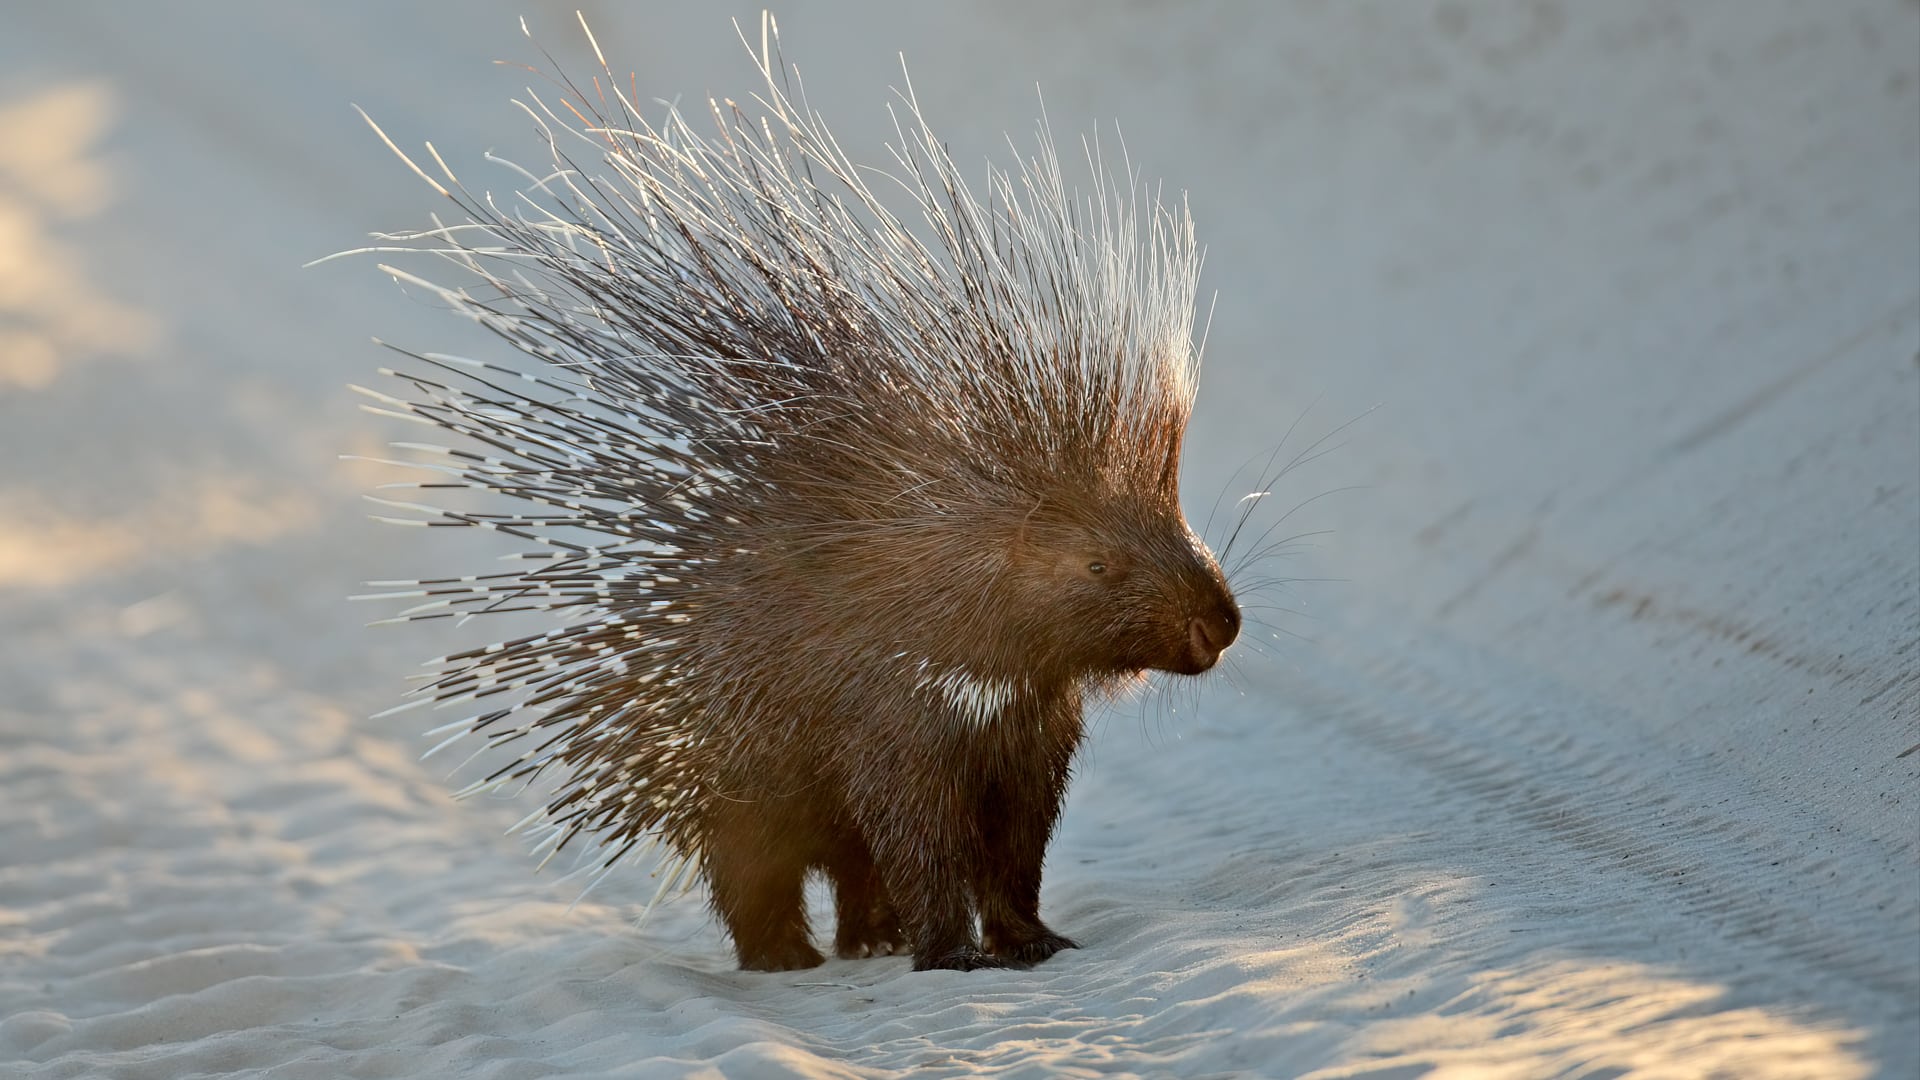 A Cape porcupine – one of Africa’s most elusive safari animals – stands on the road on a safari in South Africa.